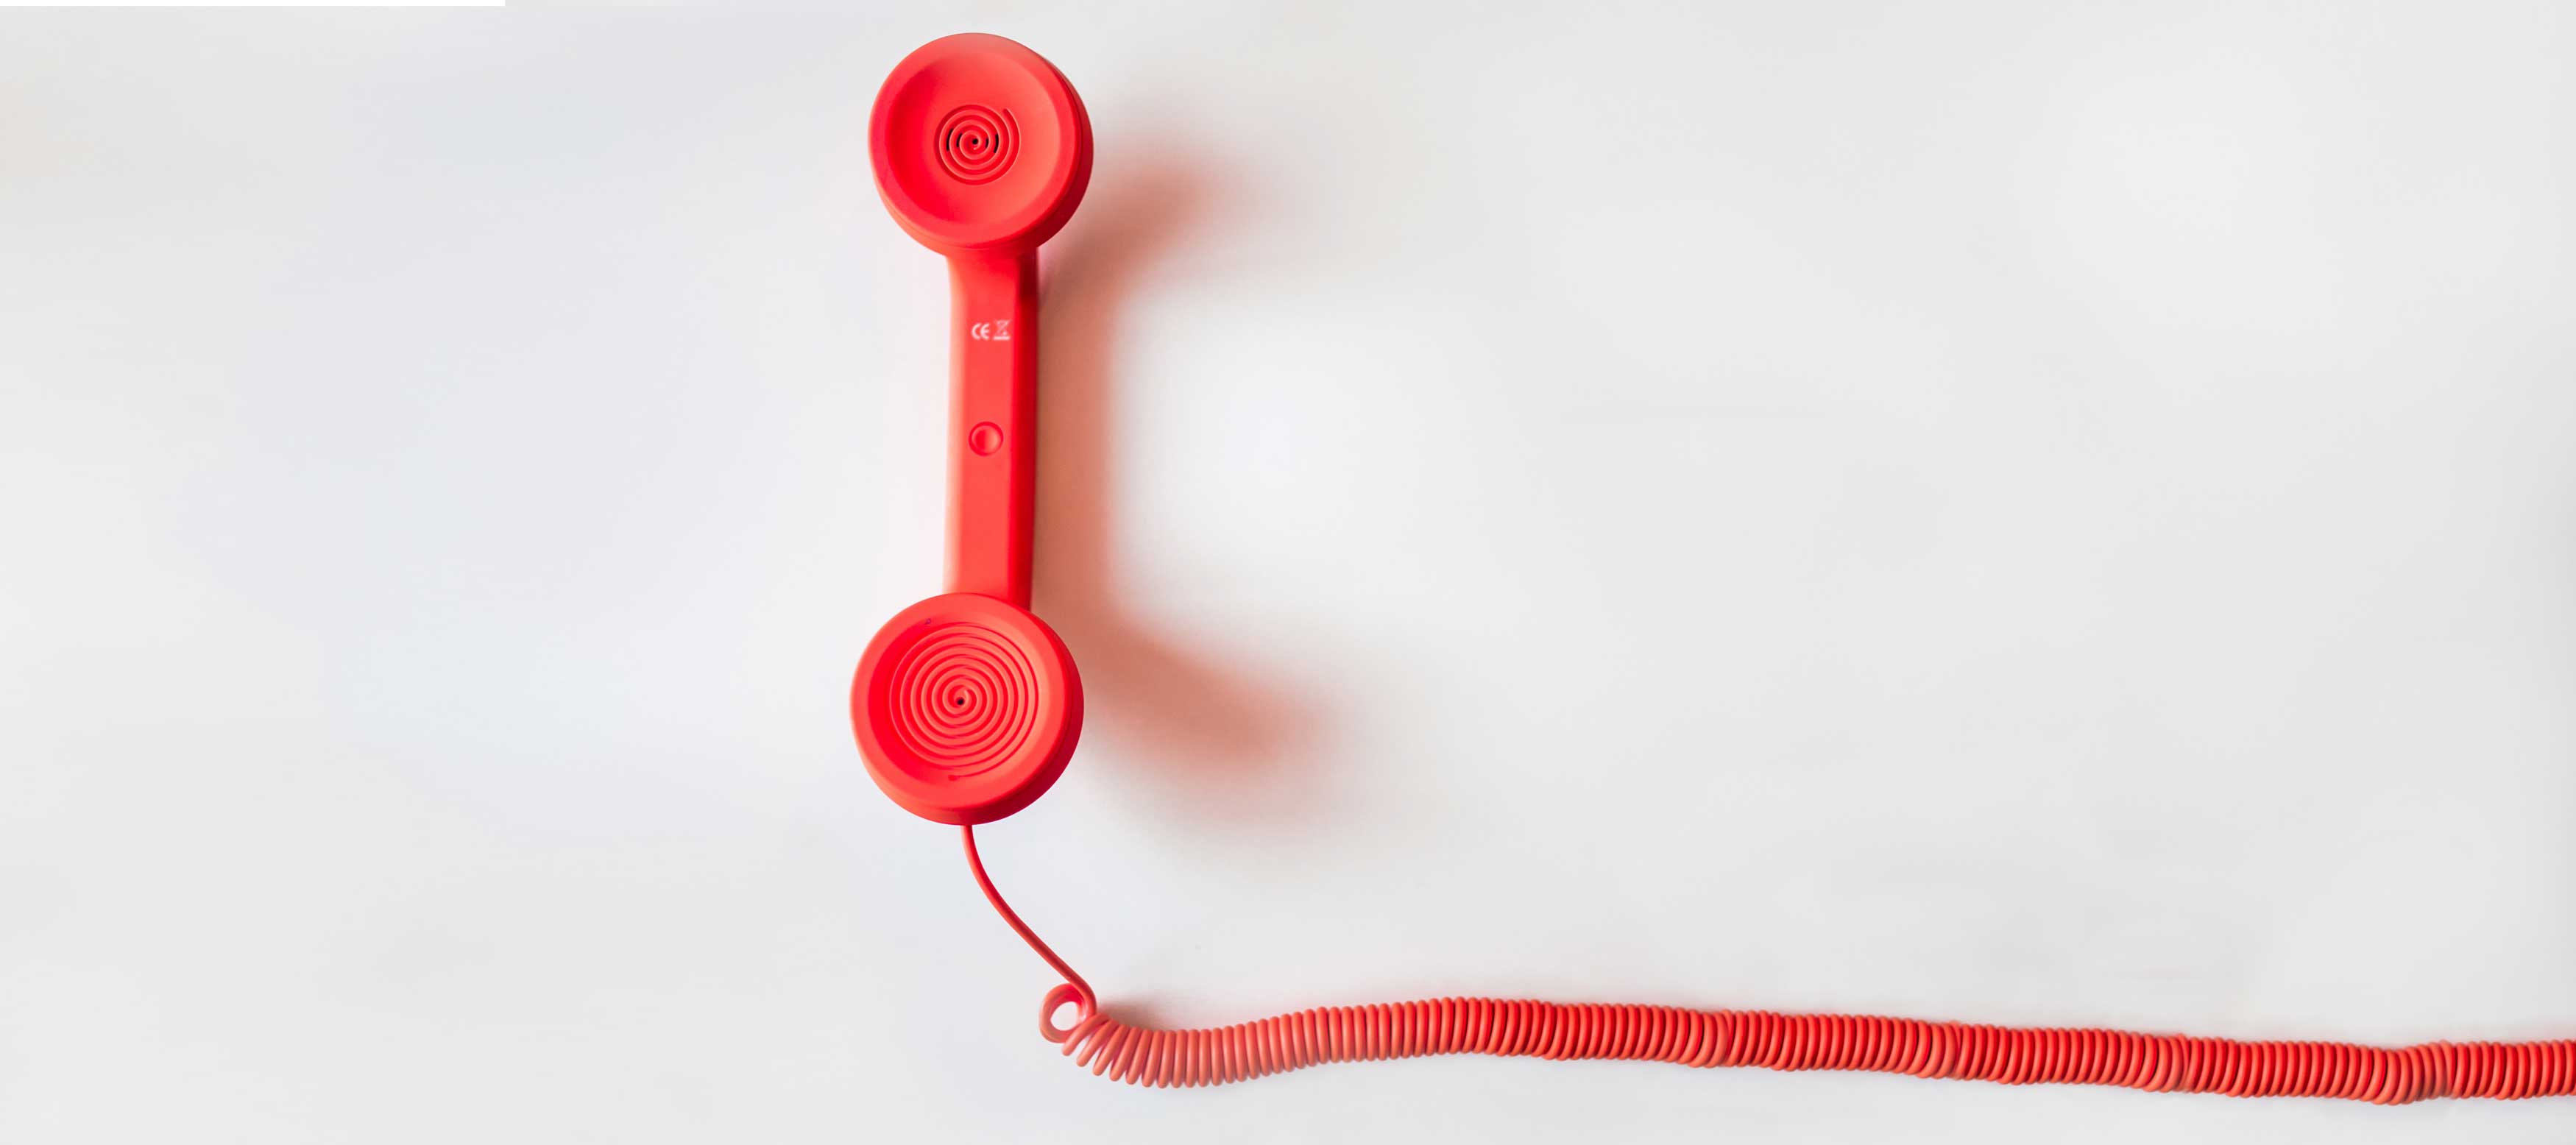 telephone-heroic-fundraising-featured-image